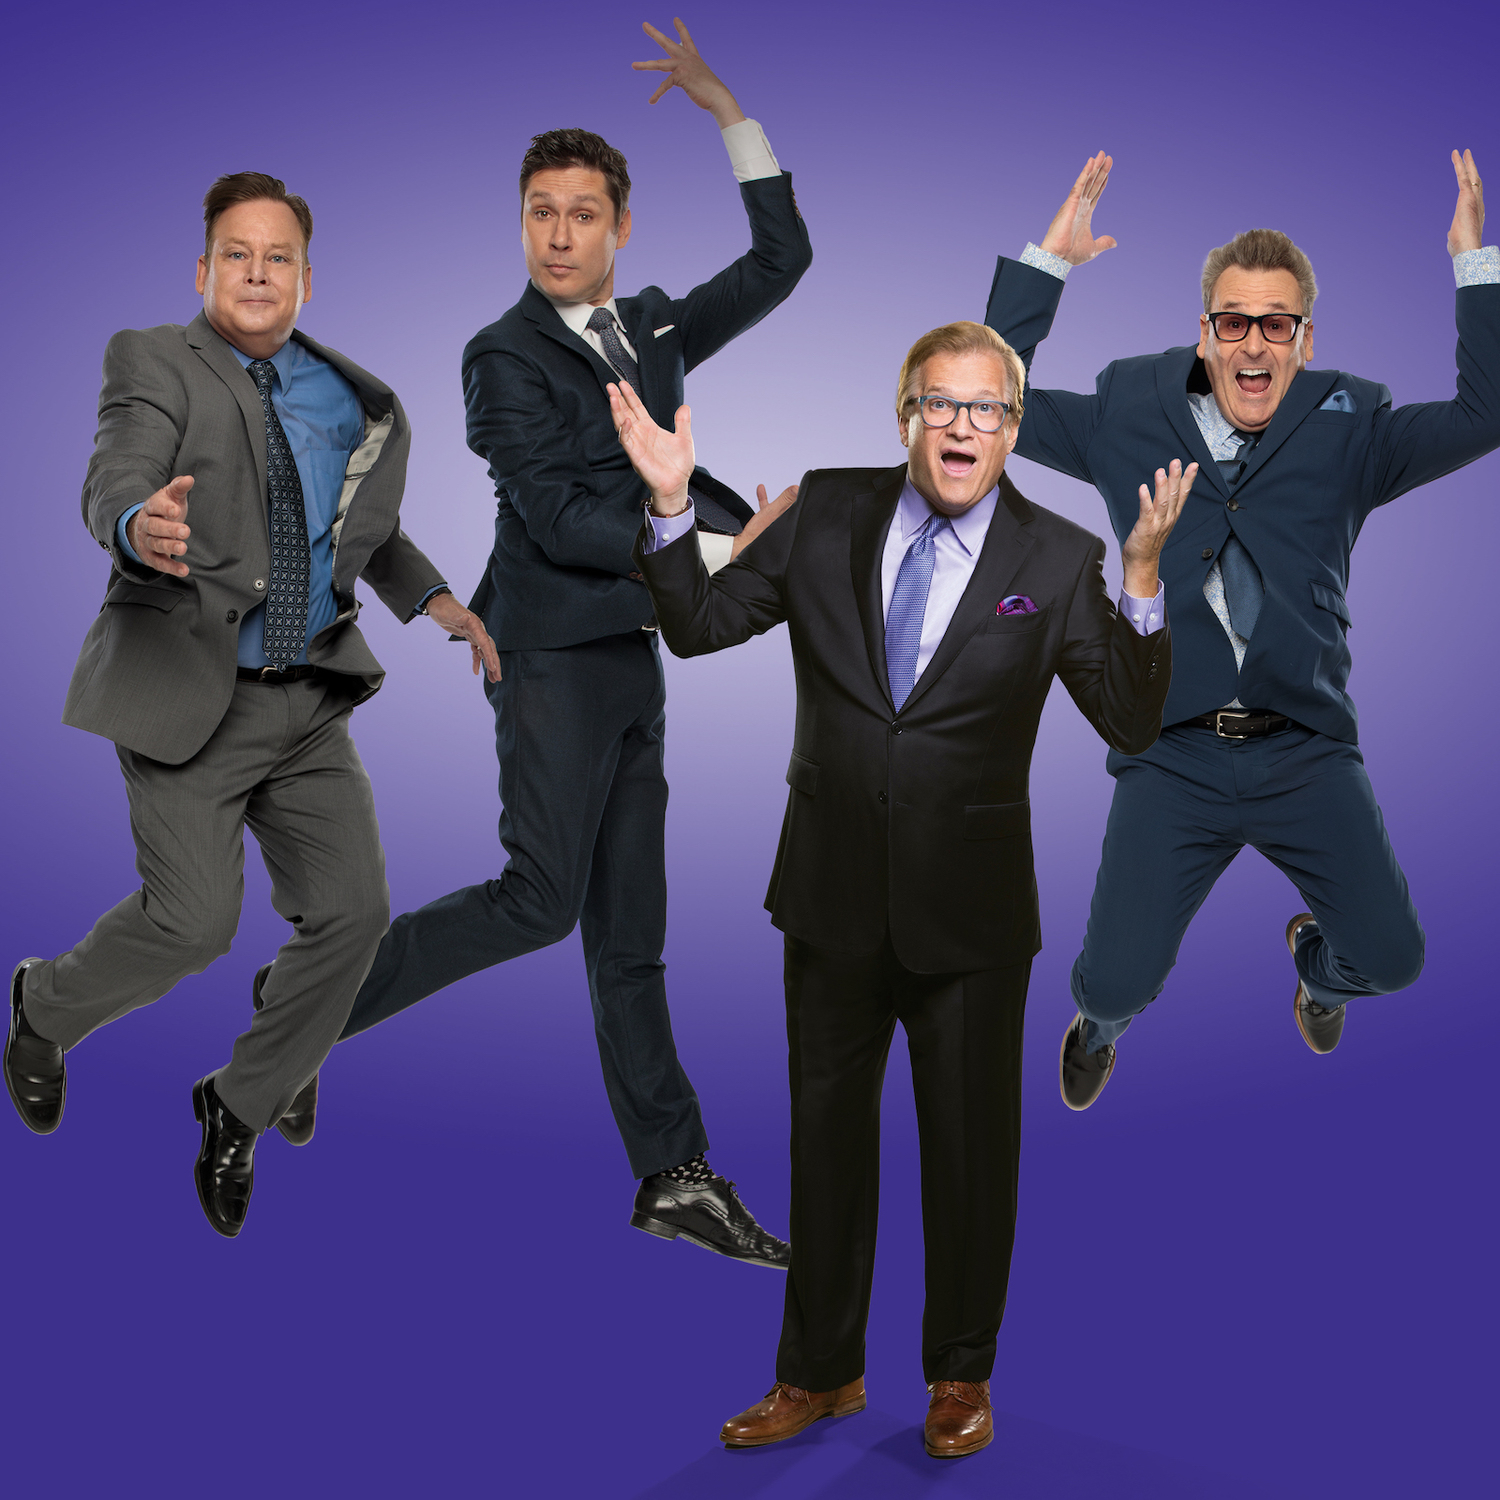 Review: A HILARIOUS TIME HAD BY ALL DURING WHO'S LIVE ANYWAY at Ruth Eckerd Hall 